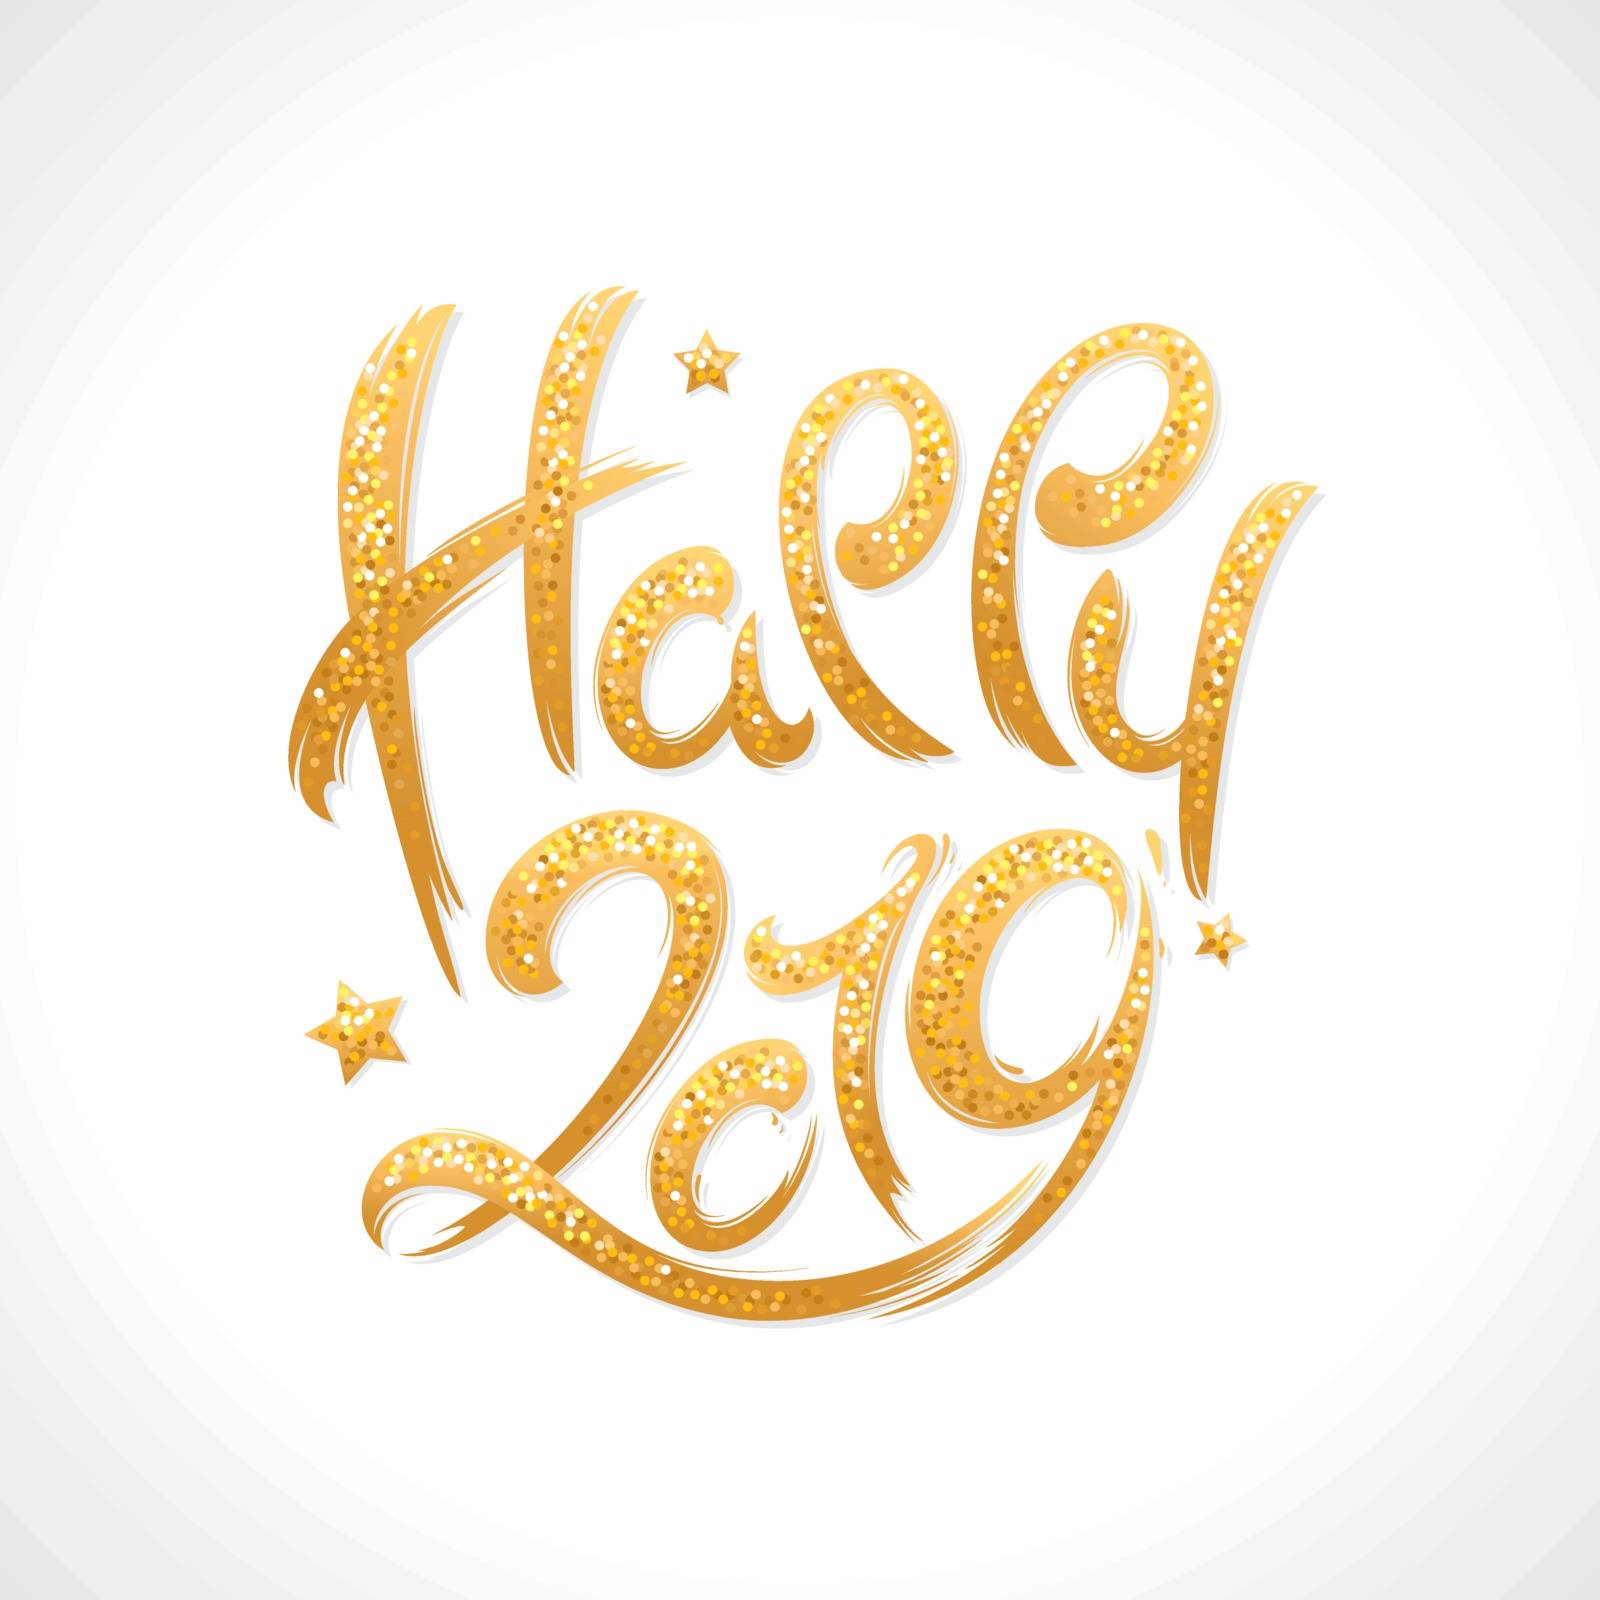 2019 New Year handwritten shimmering lettering greeting card. Hand drawn vector illustration